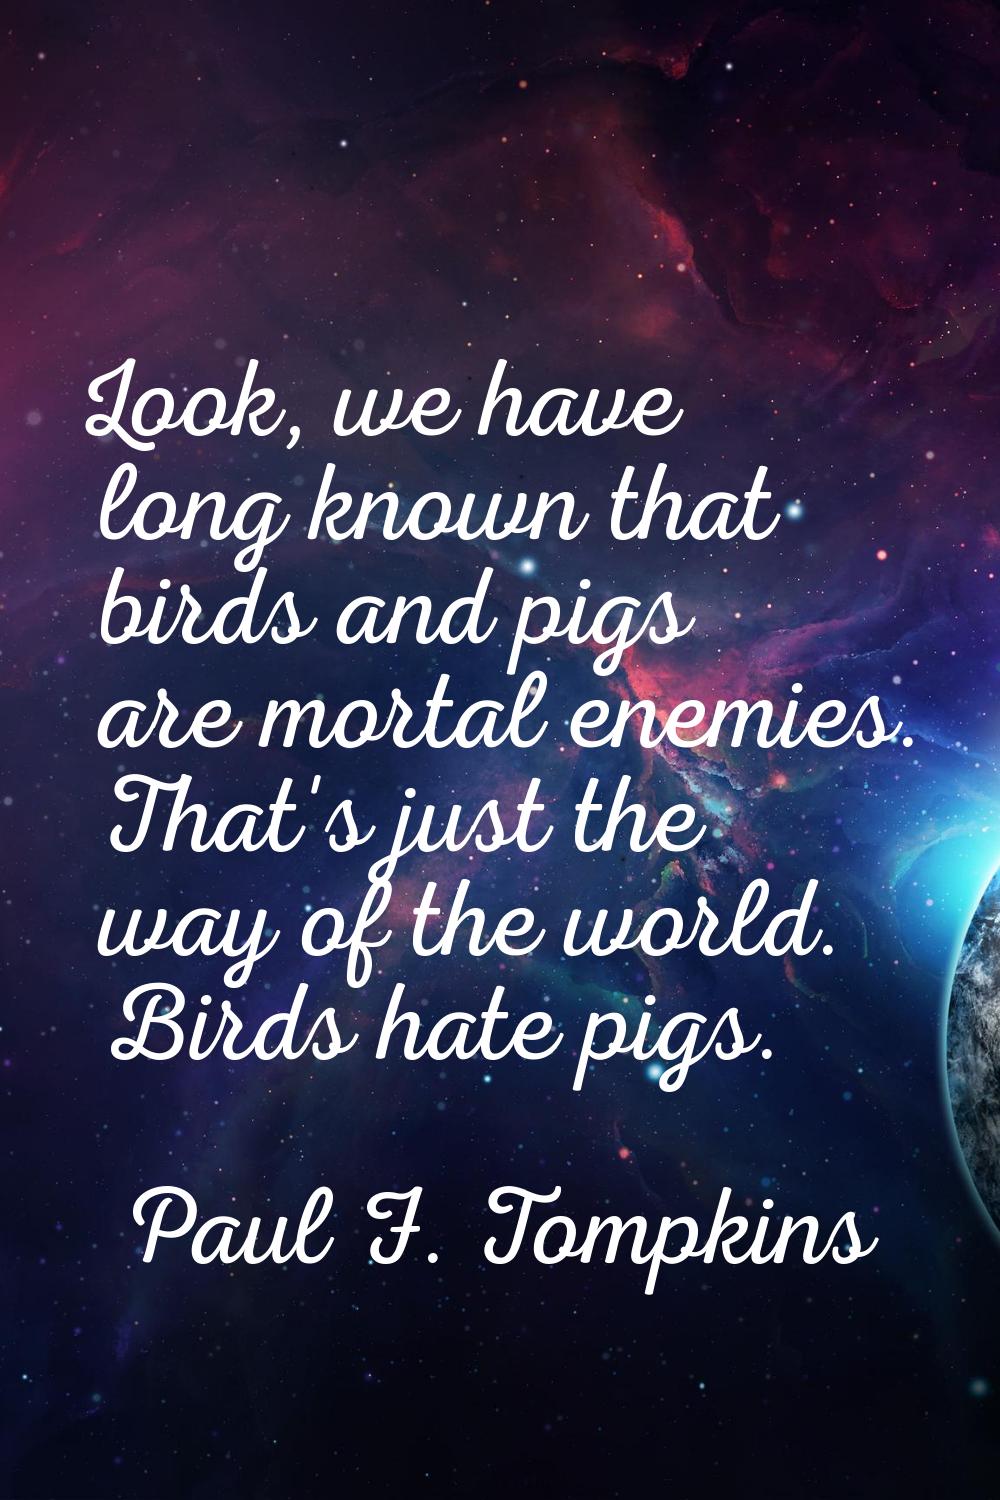 Look, we have long known that birds and pigs are mortal enemies. That's just the way of the world. 